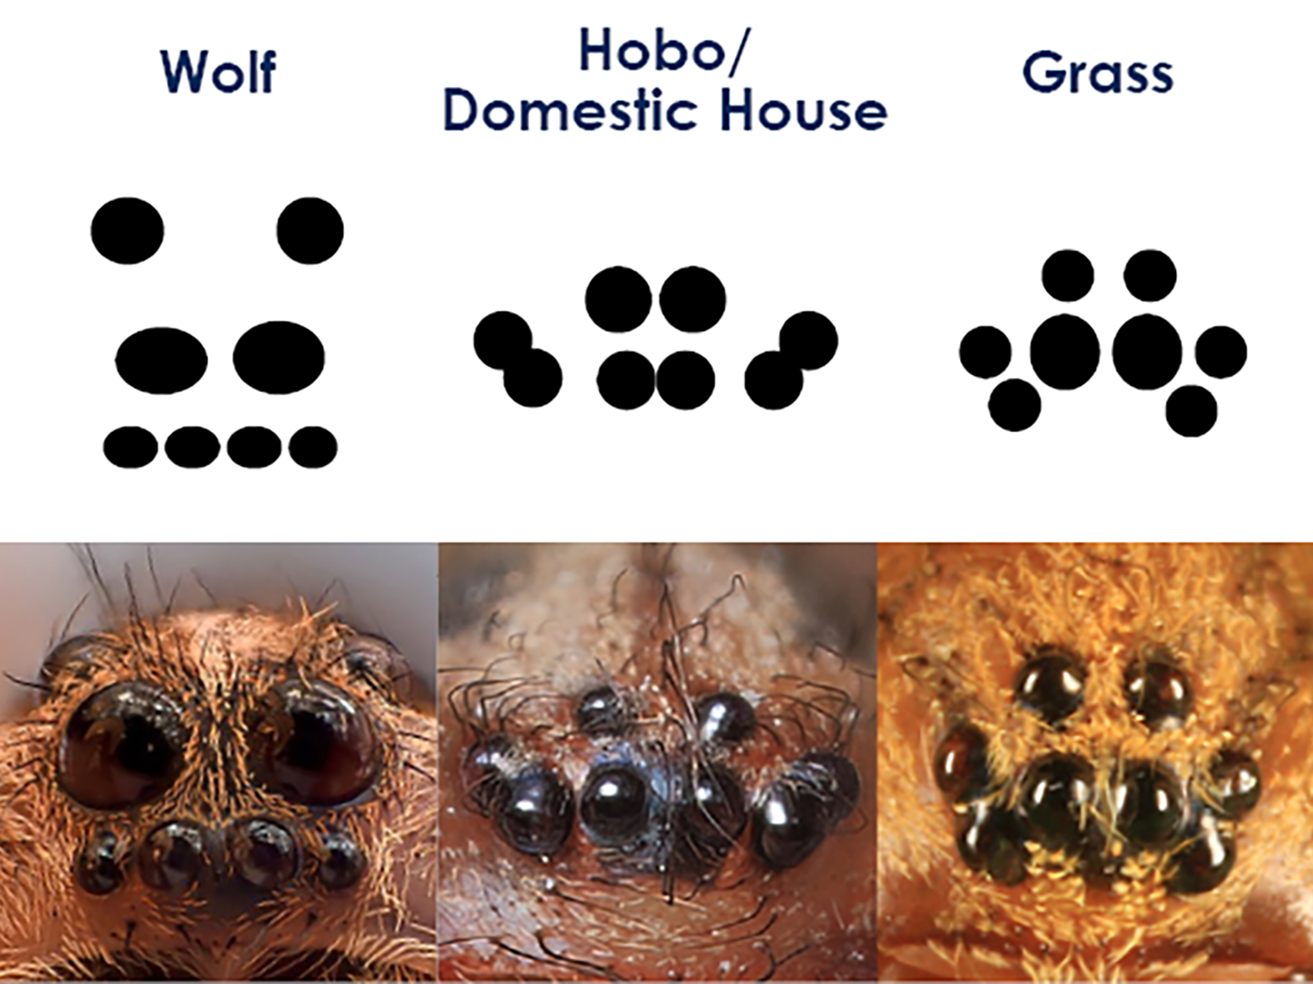 Fig. 4. Eye Arrangement of Wolf Spiders (left), Domestic or Hobo Spiders (middle), and Grass Spiders (right)